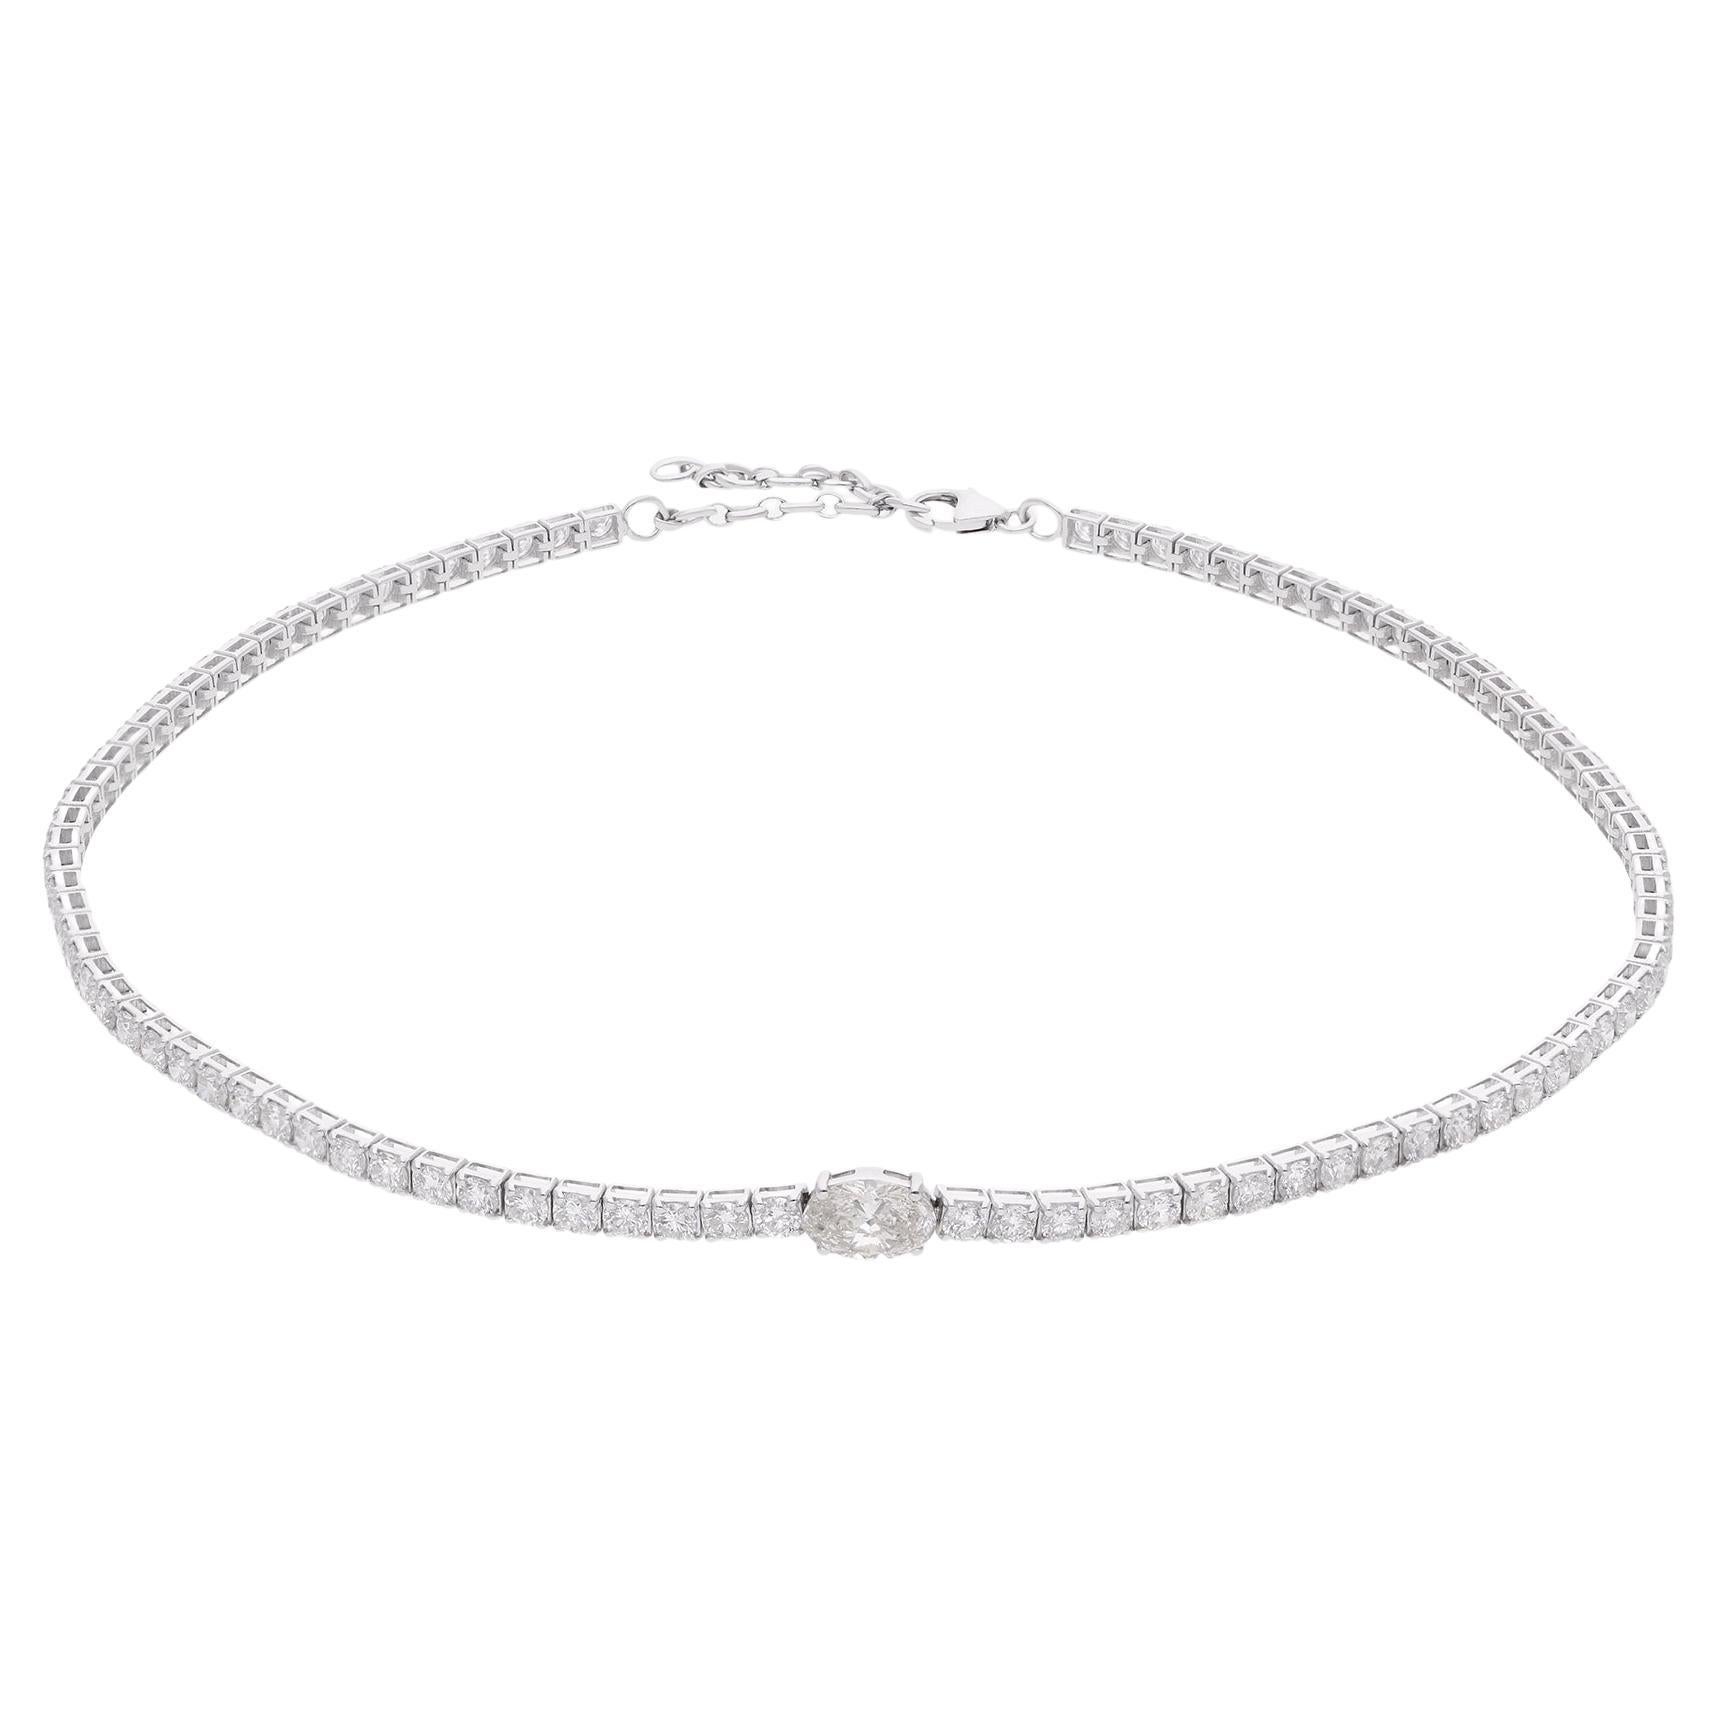 New Natural 9.25 Carat Oval & Round Diamond Choker Necklace 18 Karat White Gold For Sale